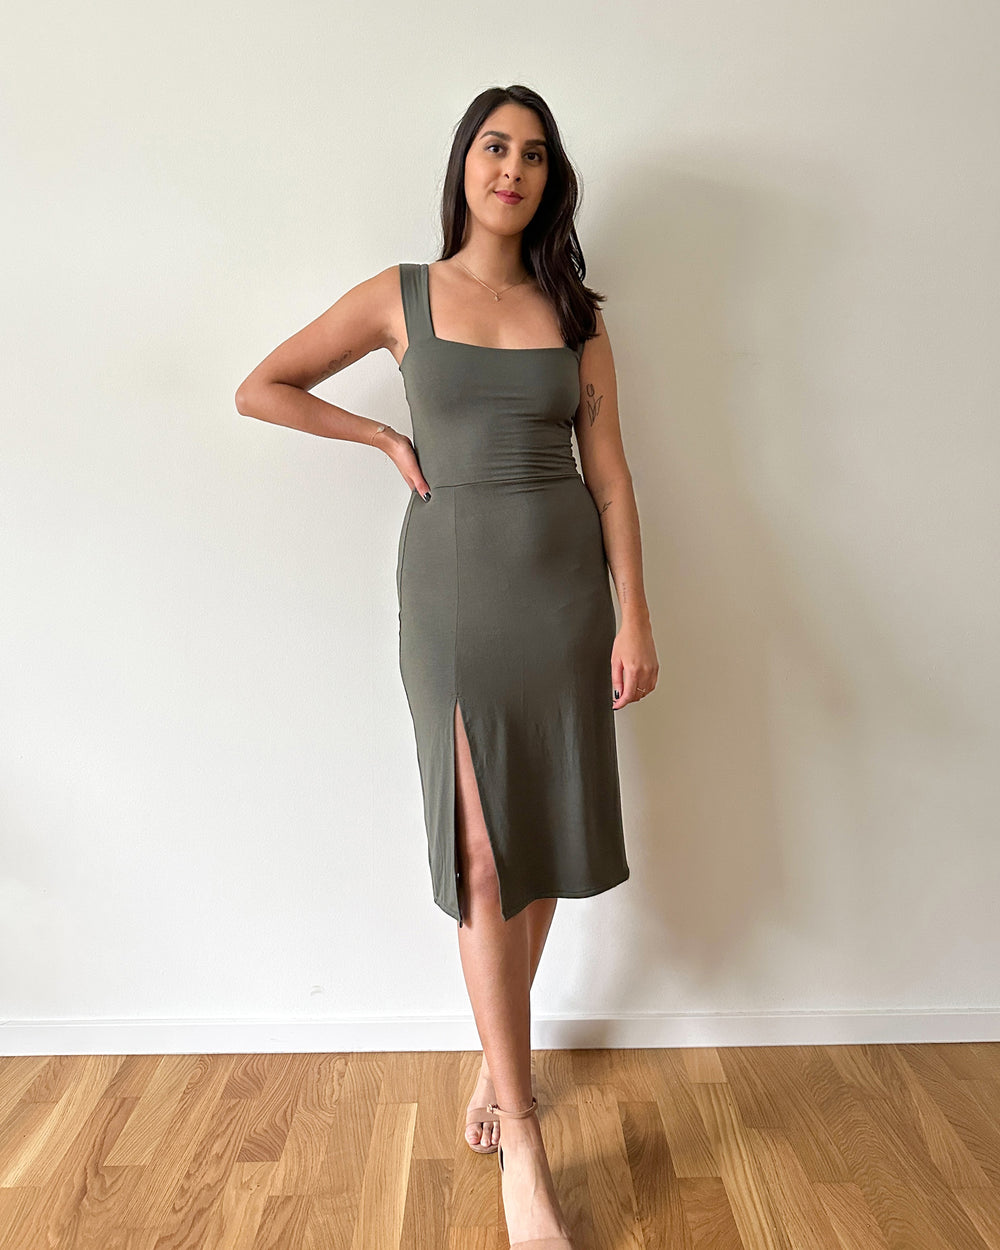 Woman wearing the Raveena Dress sewing pattern from Tammy Handmade on The Fold Line. A dress pattern made in viscose/jersey knits, stretch velvet or any stretchy fabric with at least 5% elastane/spandex content or at least 40% stretch, featuring a midi le